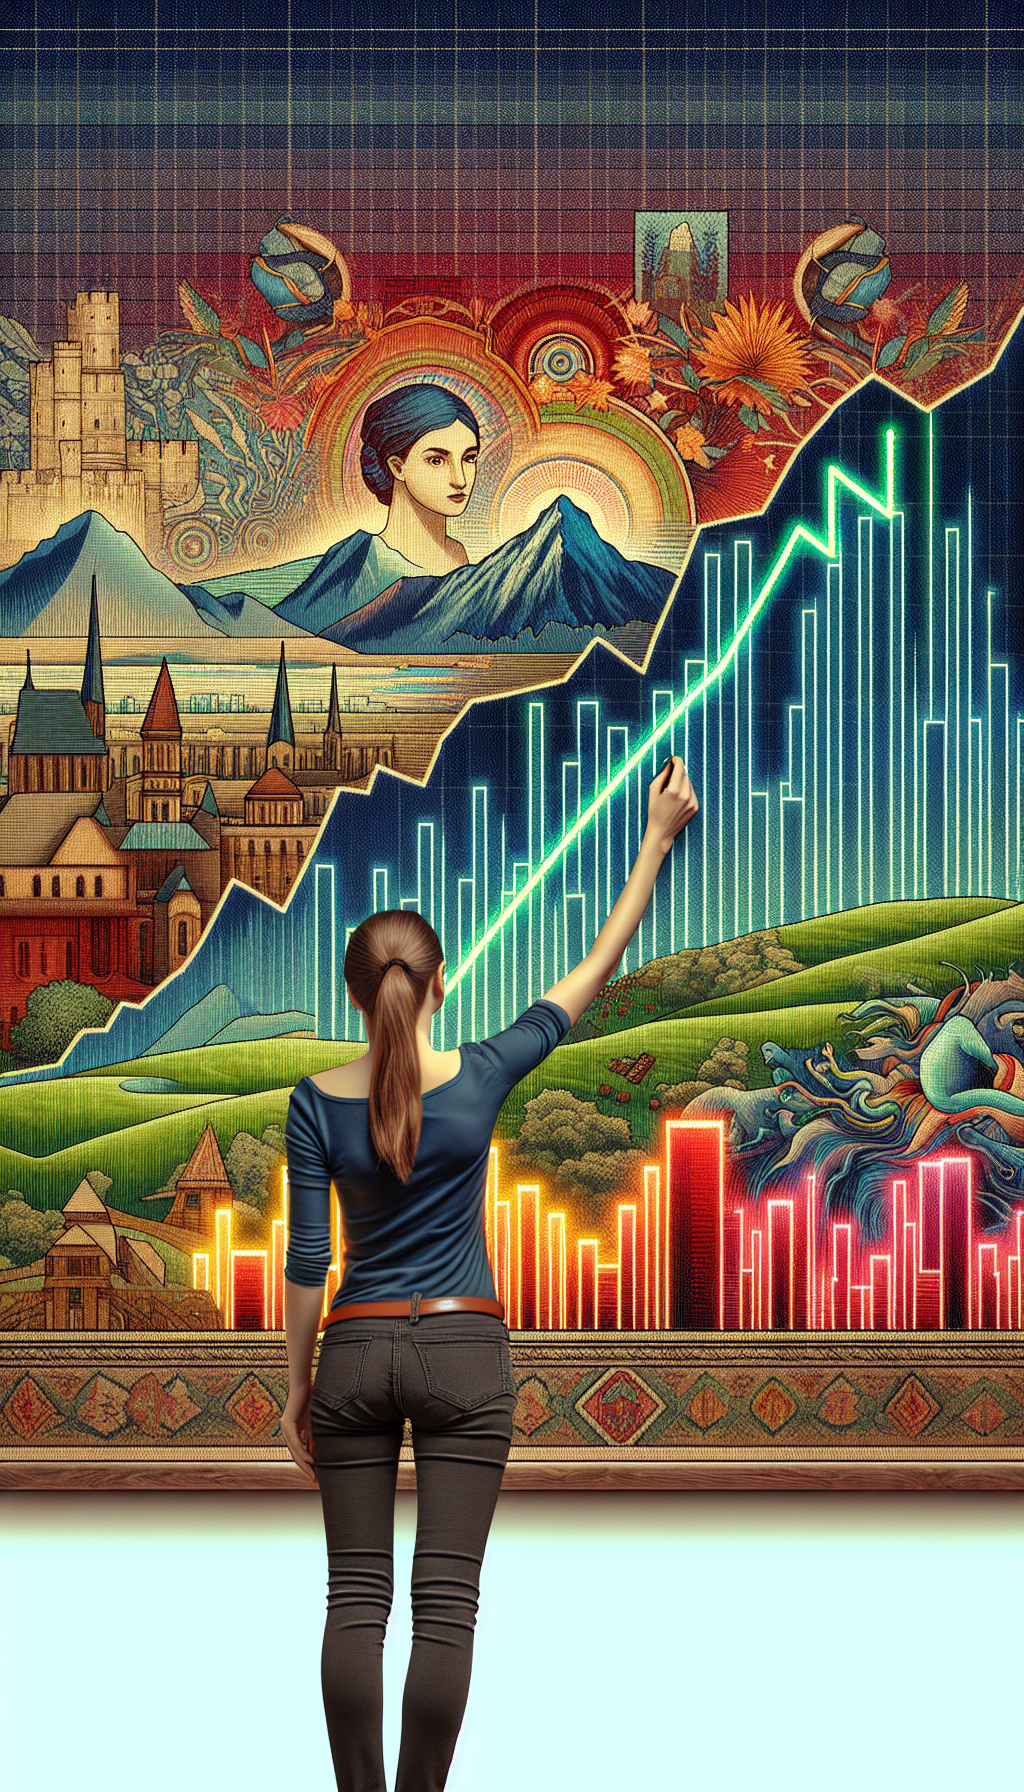 An illustration depicts an art appraiser evaluating a vibrant tapestry, which merges classic and modern artistic motifs. The tapestry illustrates a graph with ascending values over historical landscapes, seamlessly transitioning into futuristic city skylines, symbolizing the market trends influencing art's valuation.